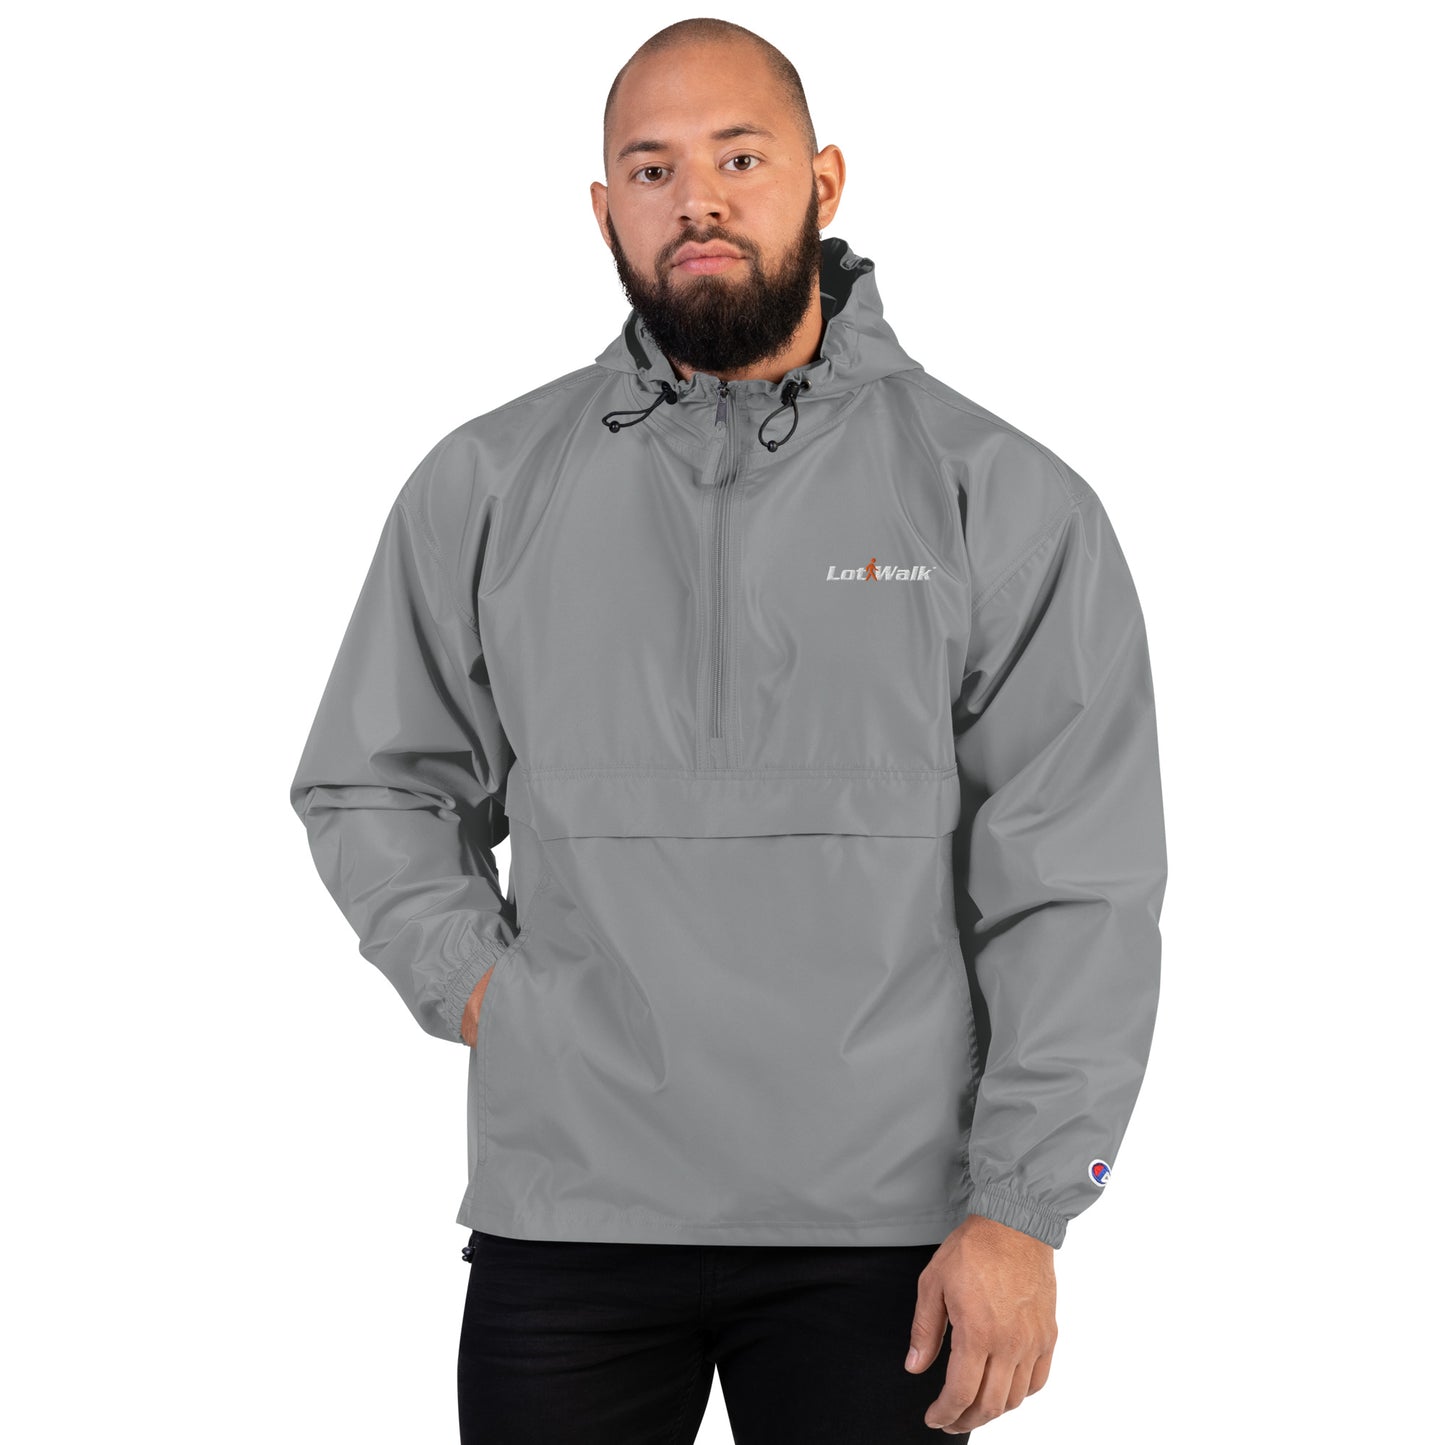 Embroidered LotWalk Champion Packable Jacket